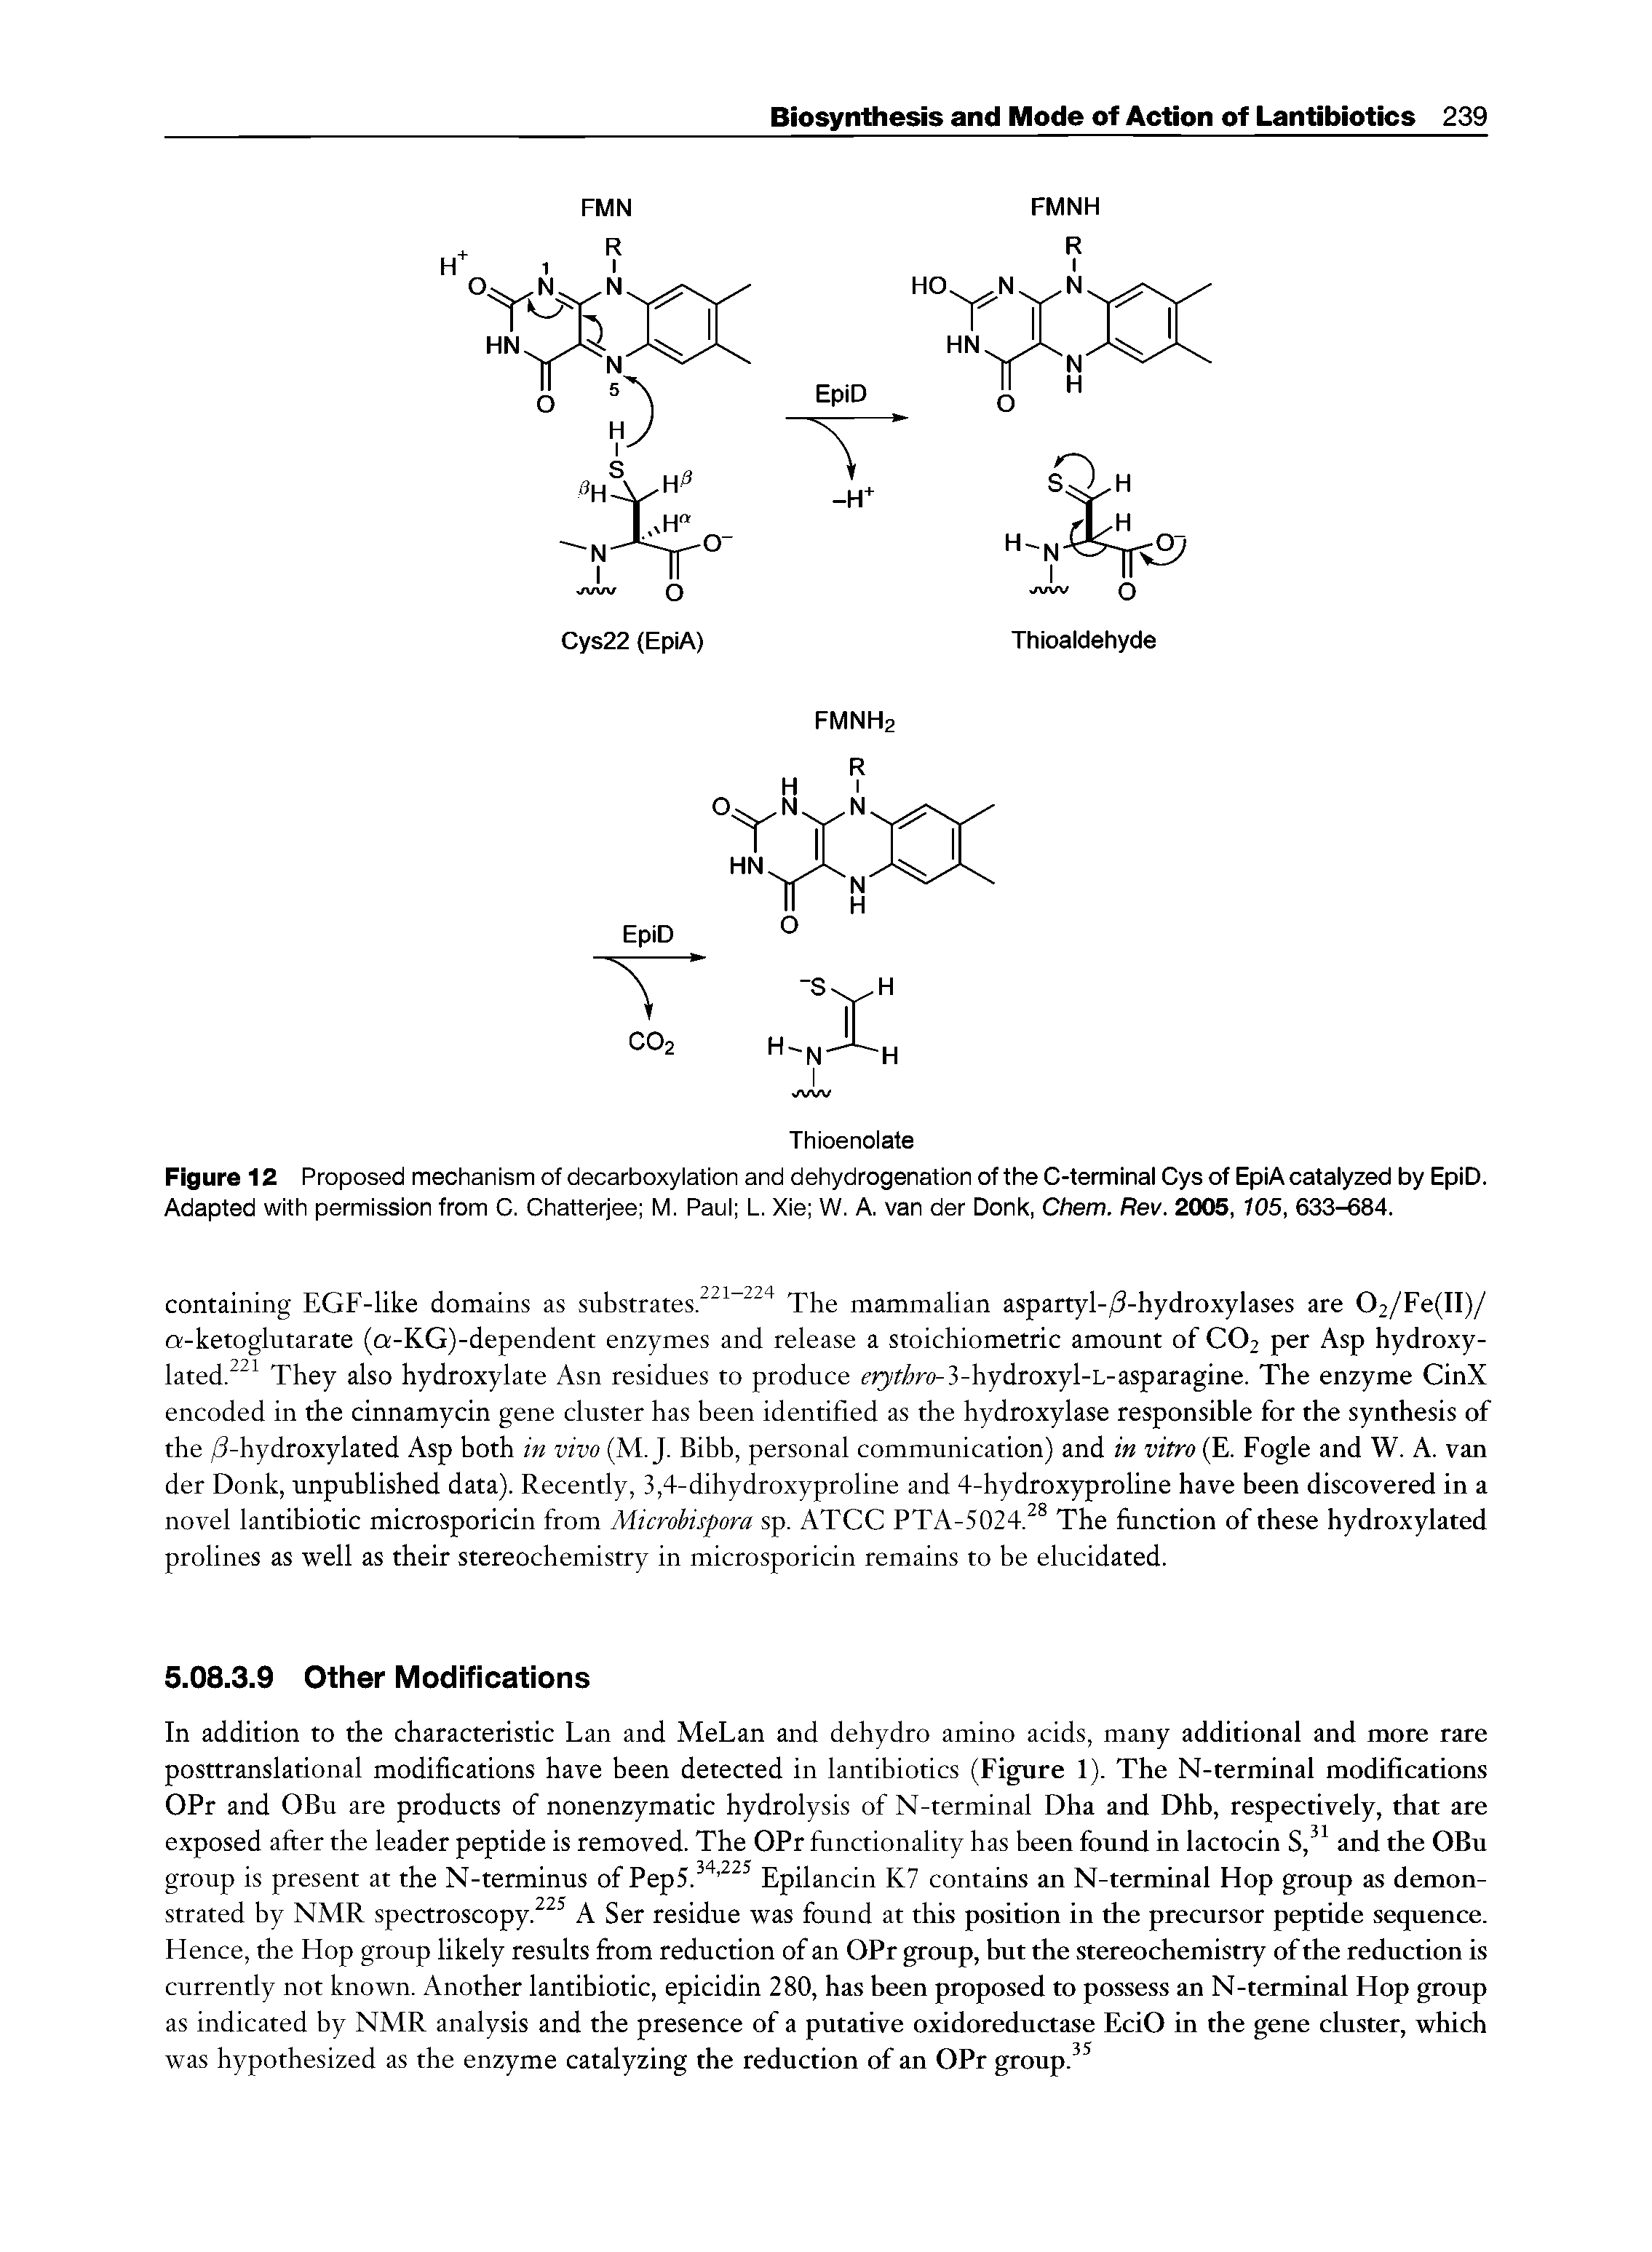 Figure 12 Proposed mechanism of decarboxylation and dehydrogenation of the C-terminal Cys of EpiA catalyzed by EpiD. Adapted with permission from C. Chatterjee M. Paul L. Xie W. A. van der Donk, Chem. Rev. 2005, 105, 633-684.